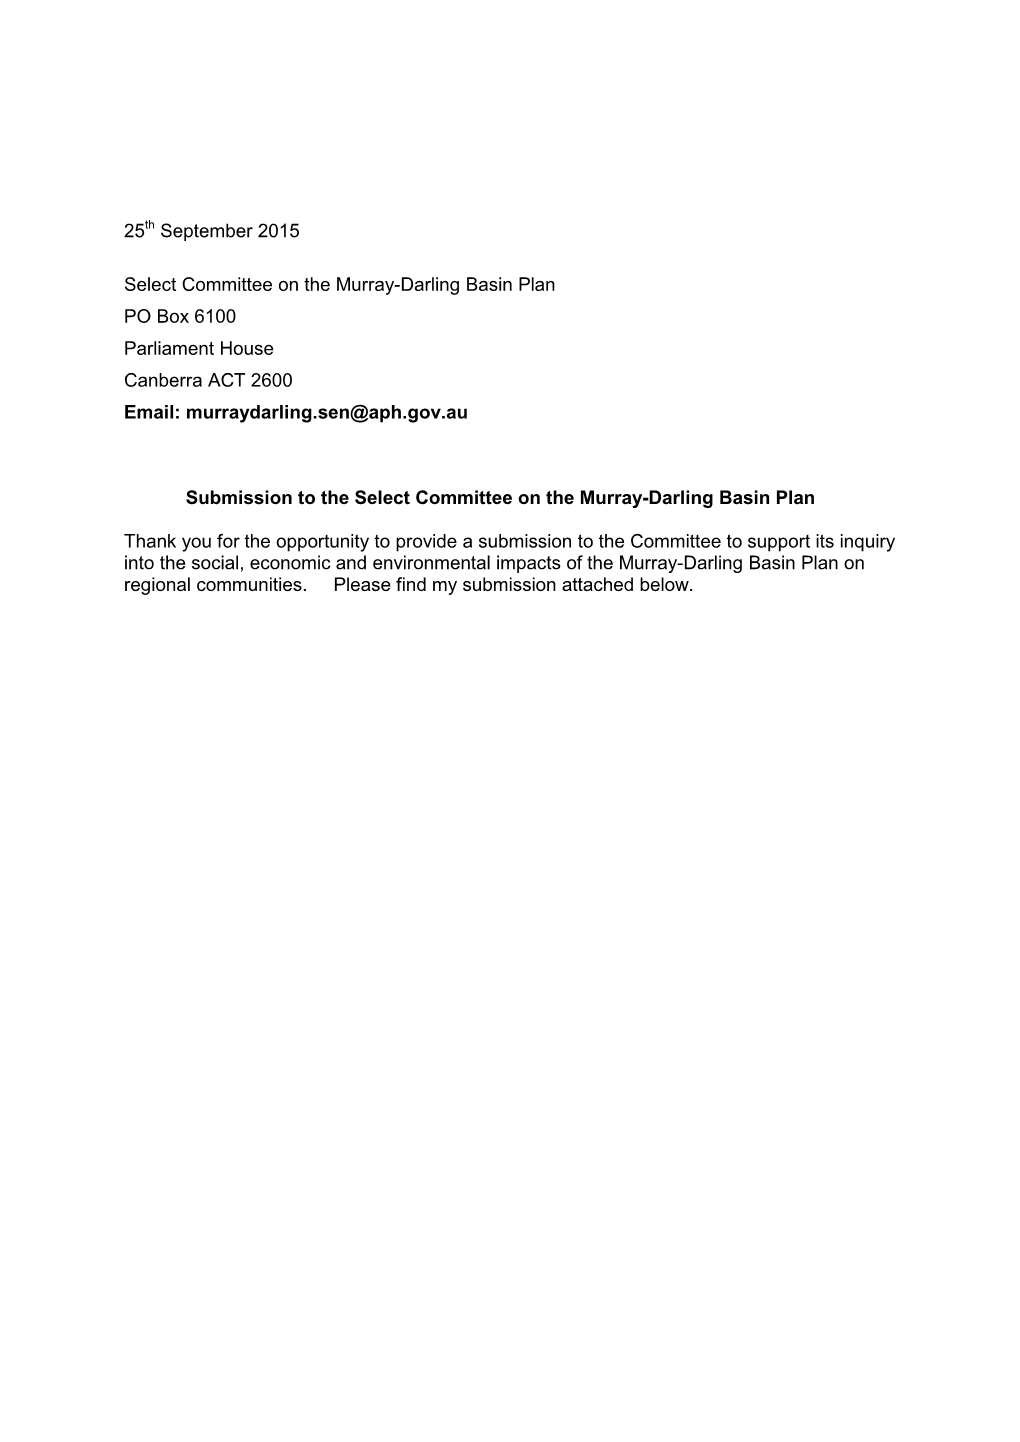 25Th September 2015 Select Committee on the Murray-Darling Basin Plan PO Box 6100 Parliament House Canberra ACT 2600 Email